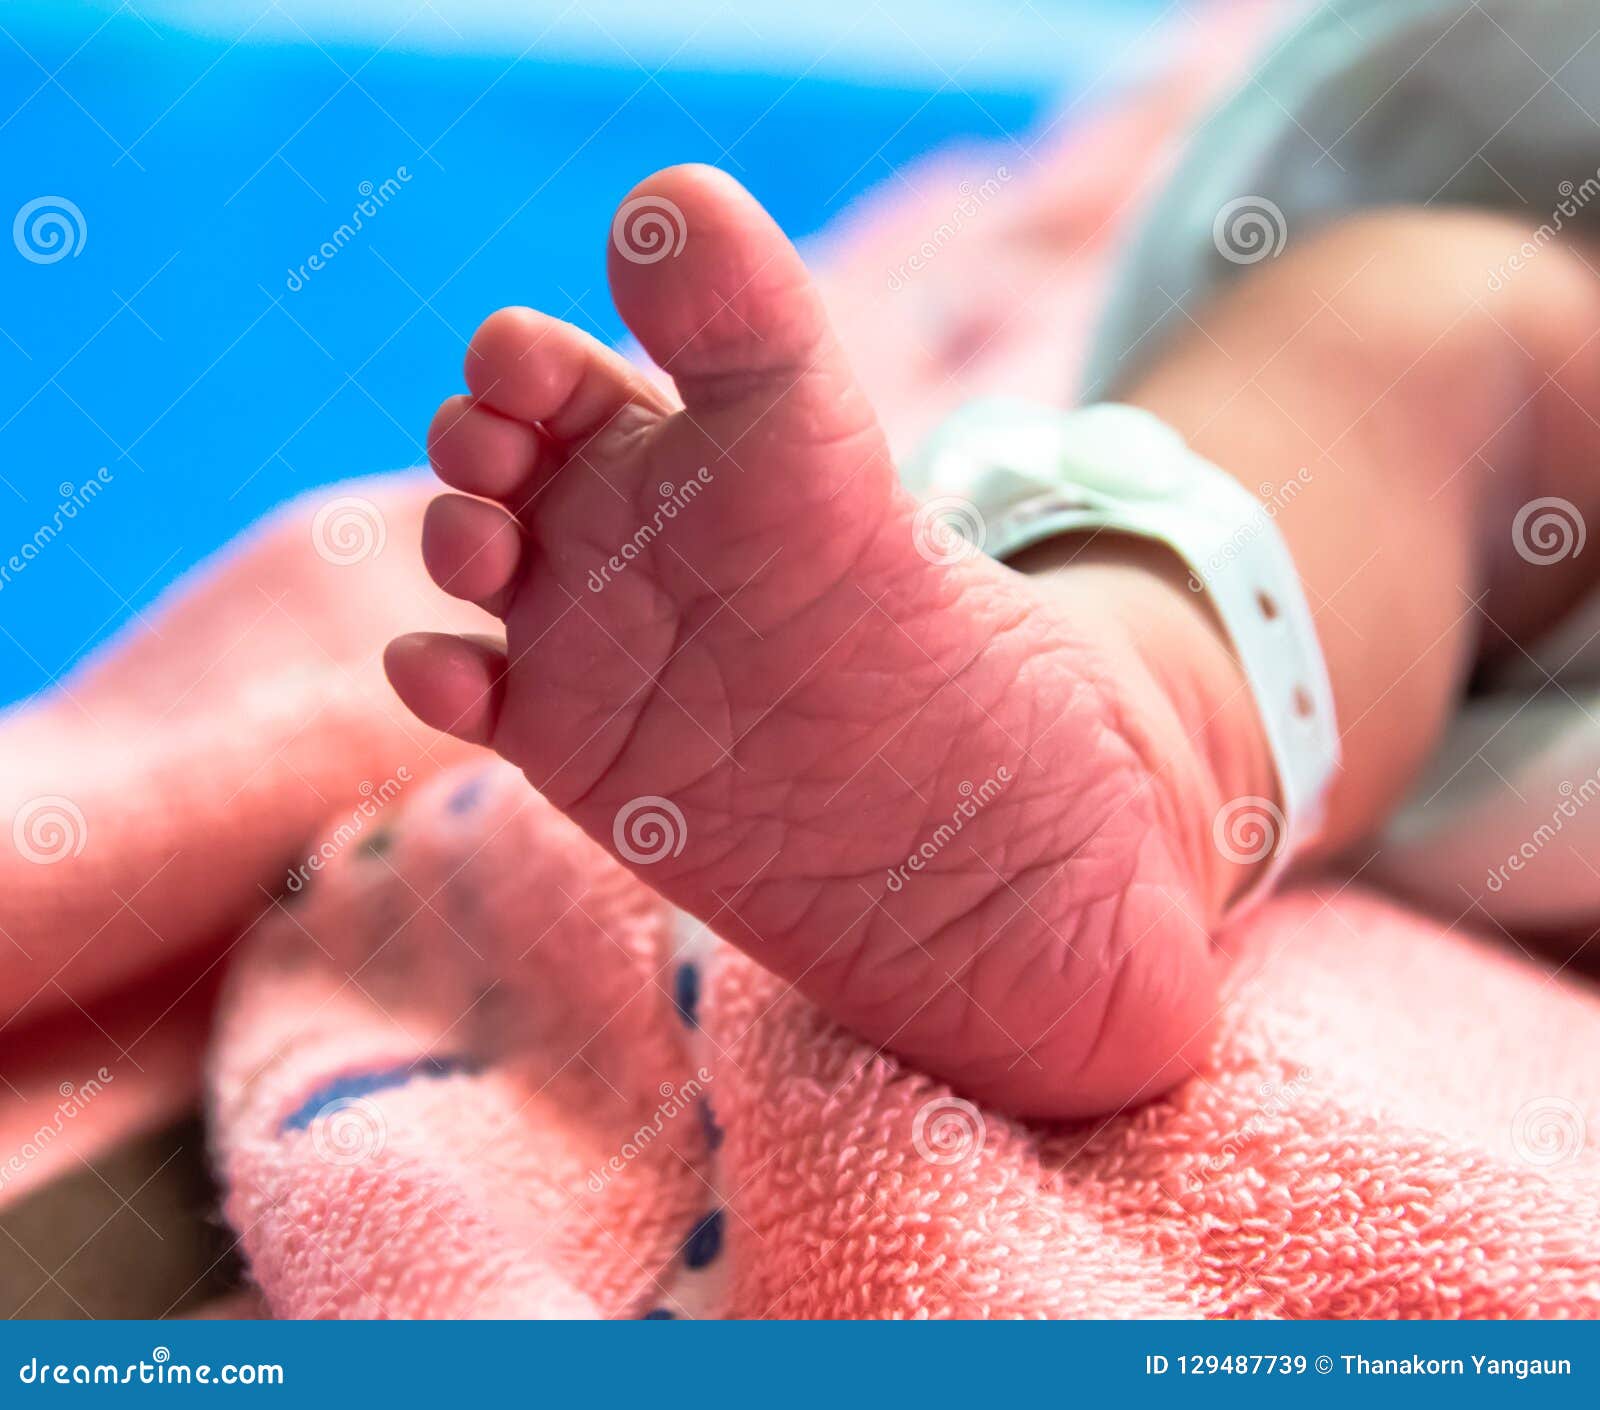 foot of newborn baby in postpartum care unit in hospital when she sleep with her mother, so cute.